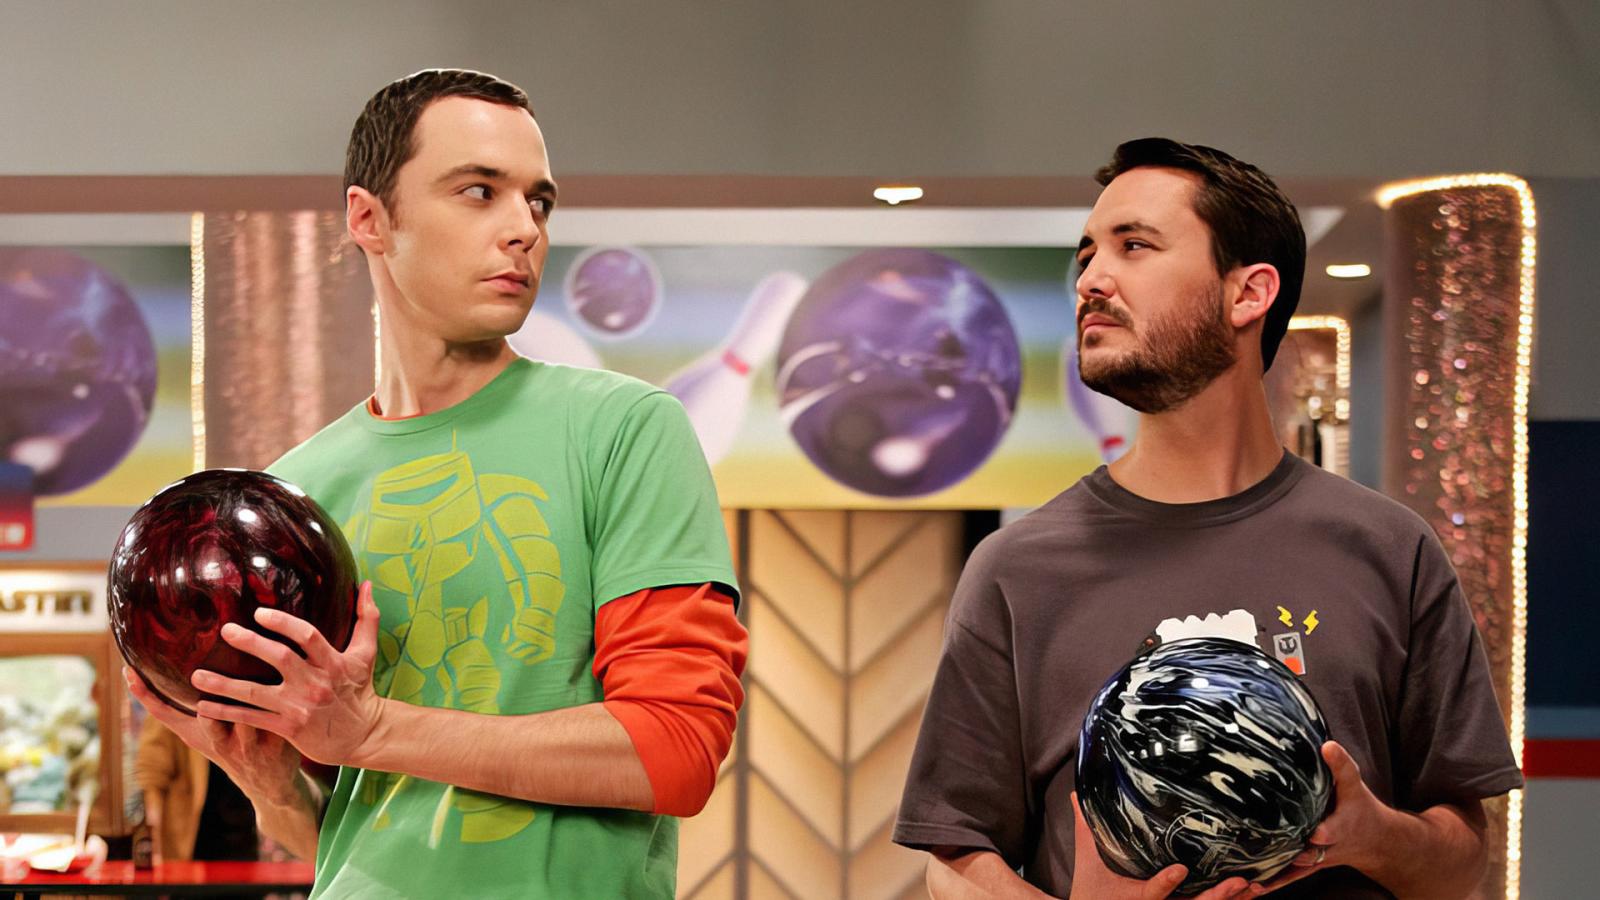 7 Most Memorable Guest Stars Who Appeared on The Big Bang Theory - image 7